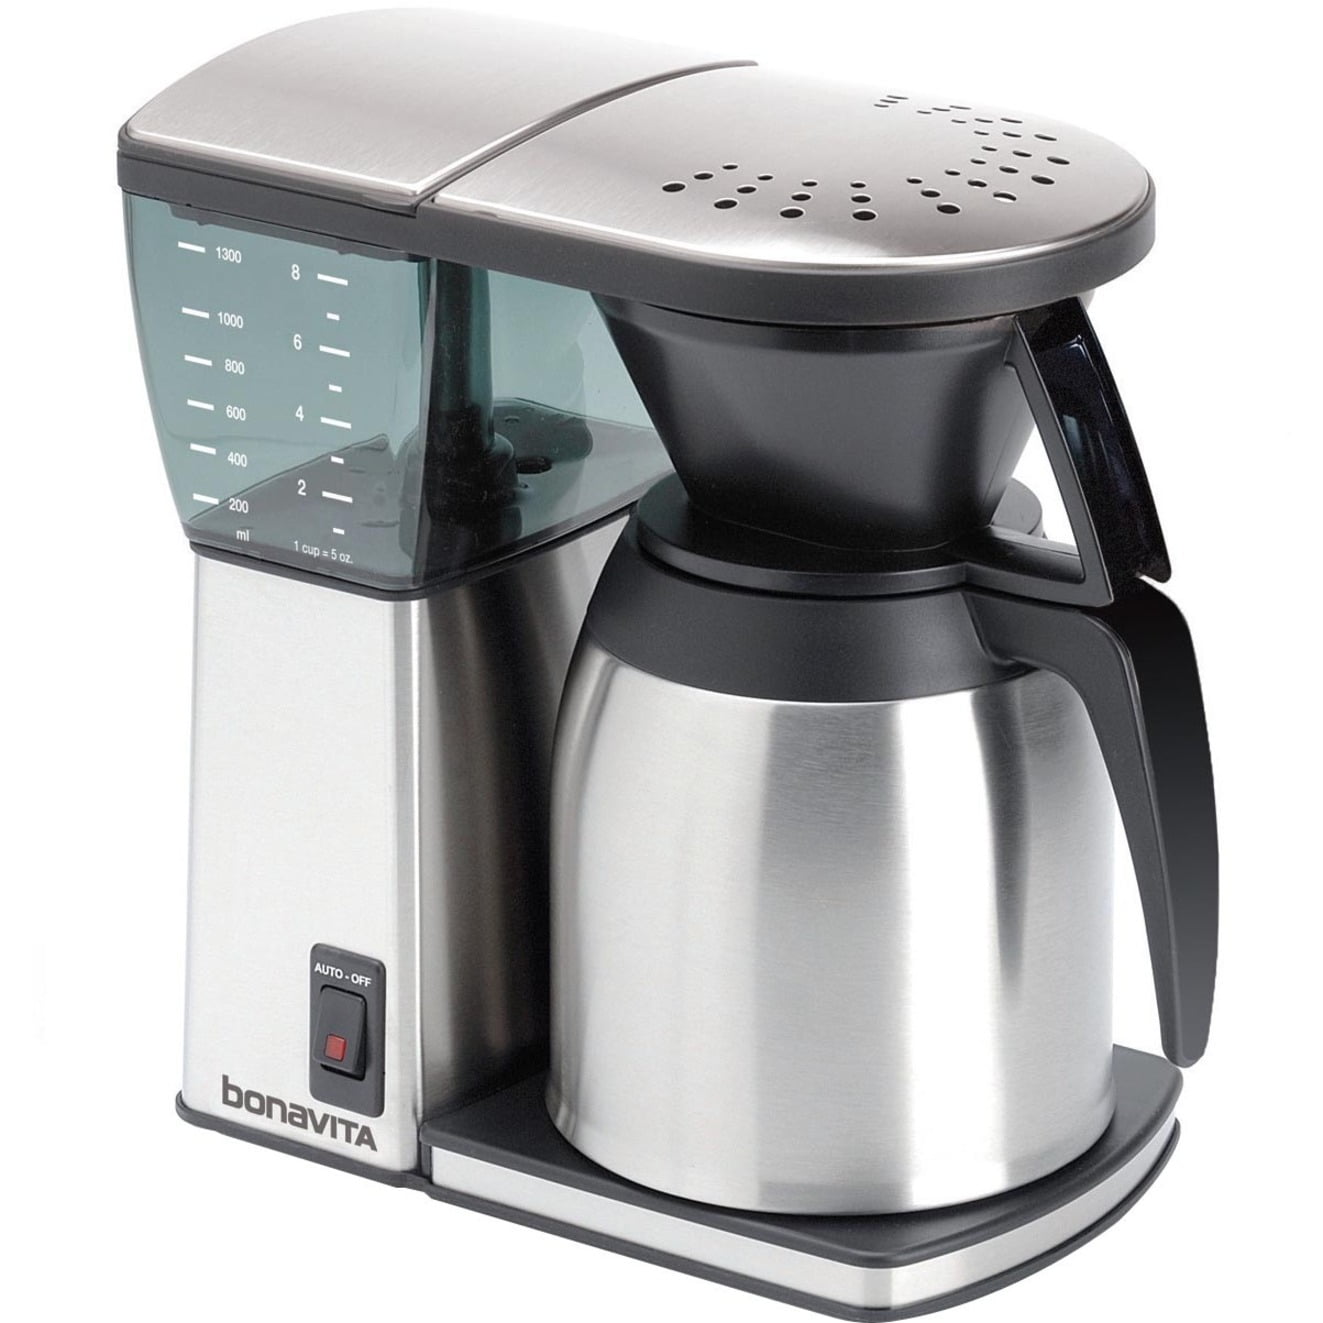 Bonavita 8-Cup One-Touch Thermal Carafe Coffee Brewer With Resting Bas